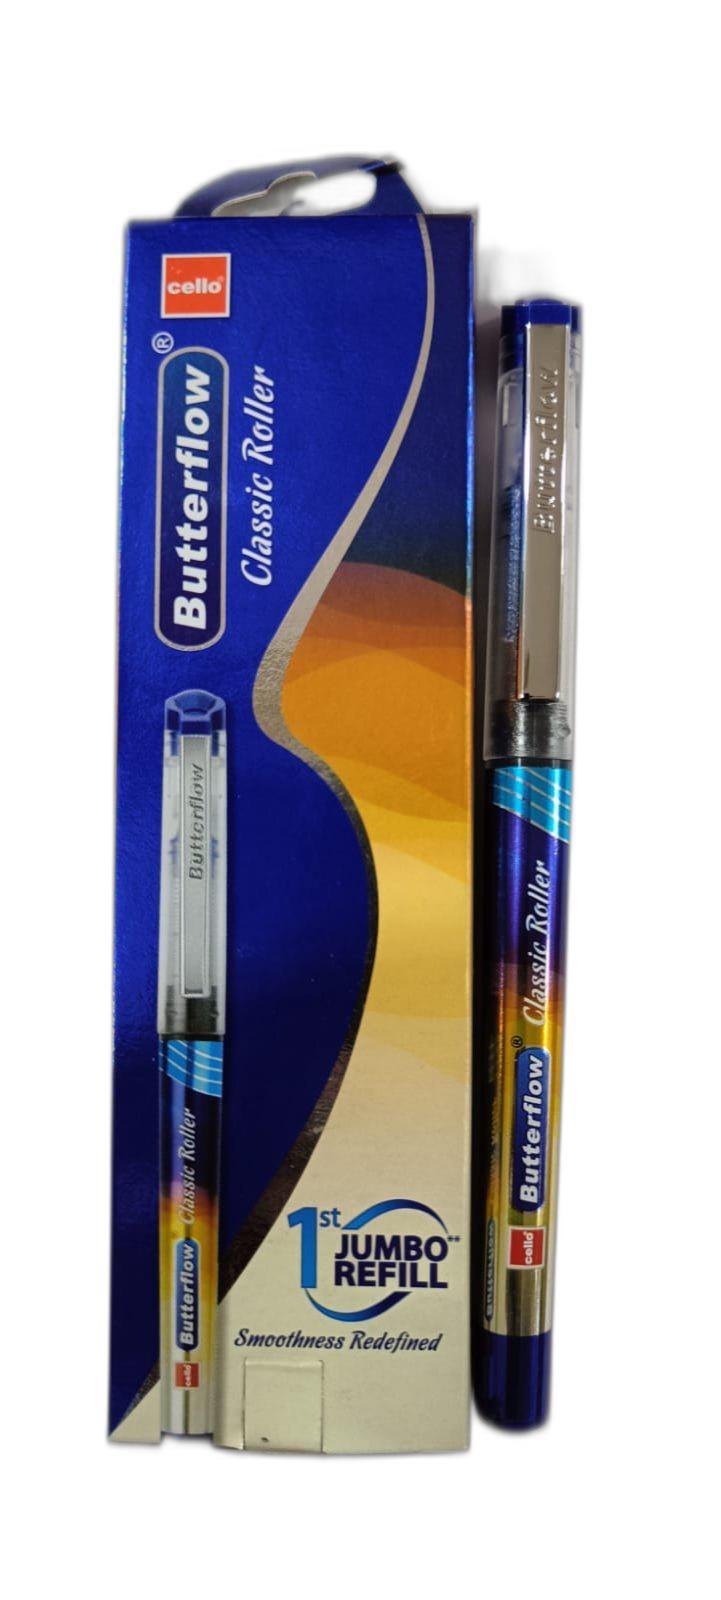 Cello Butterflow Classic Roller Pen Set | Pack of 1 Roller Pens | Smooth Writing Experience | For Students and Office Use | Best Pen for Exams